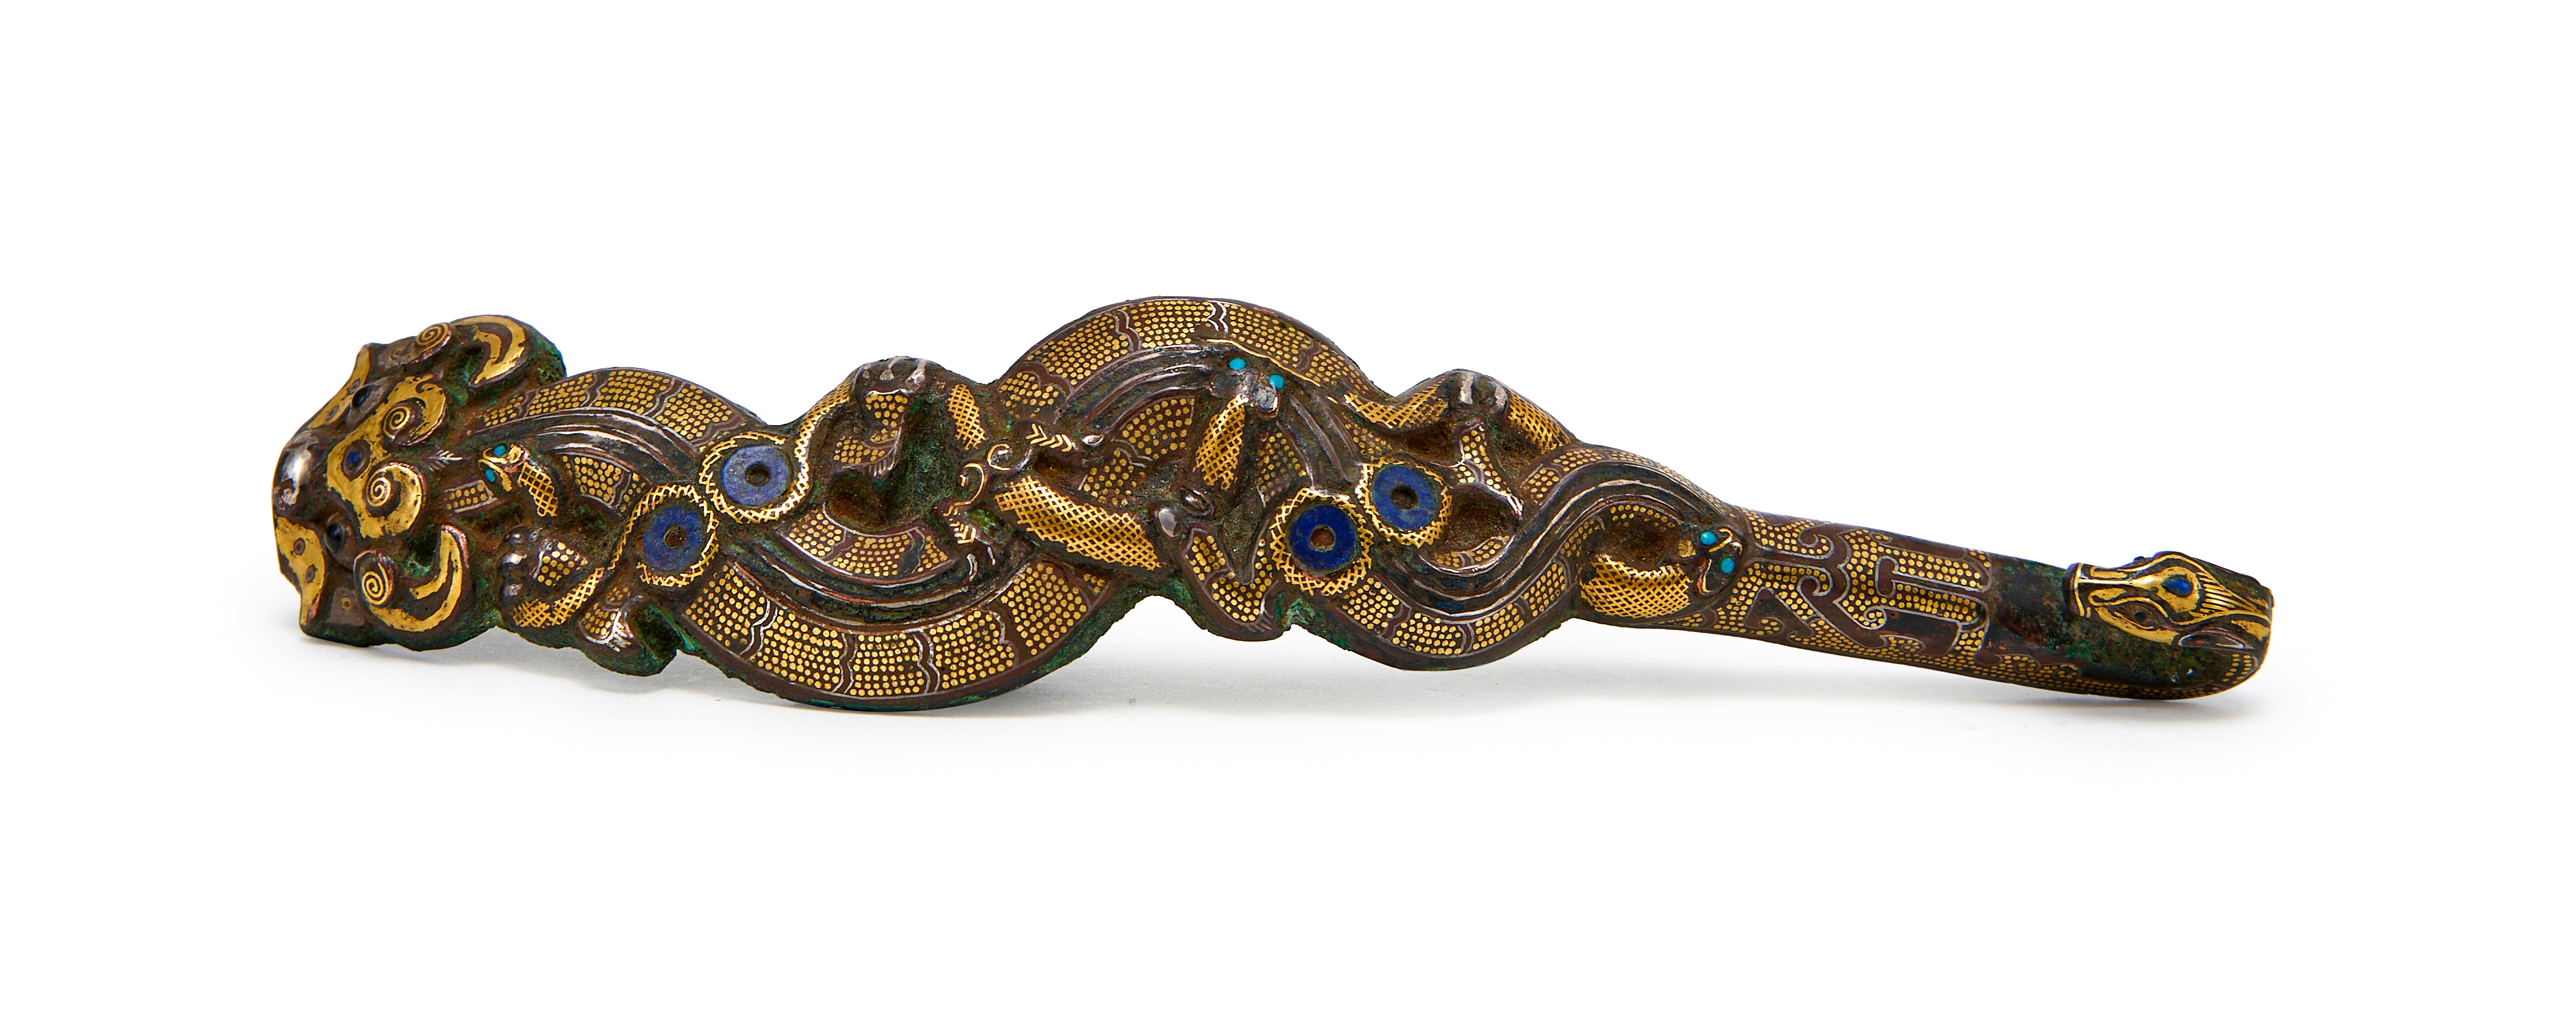 A TURQUOISE AND GOLD-INLAID BRONZE BELT HOOK WARRING STATES PERIOD, 4TH-3RD CENTURY BC - Image 4 of 9